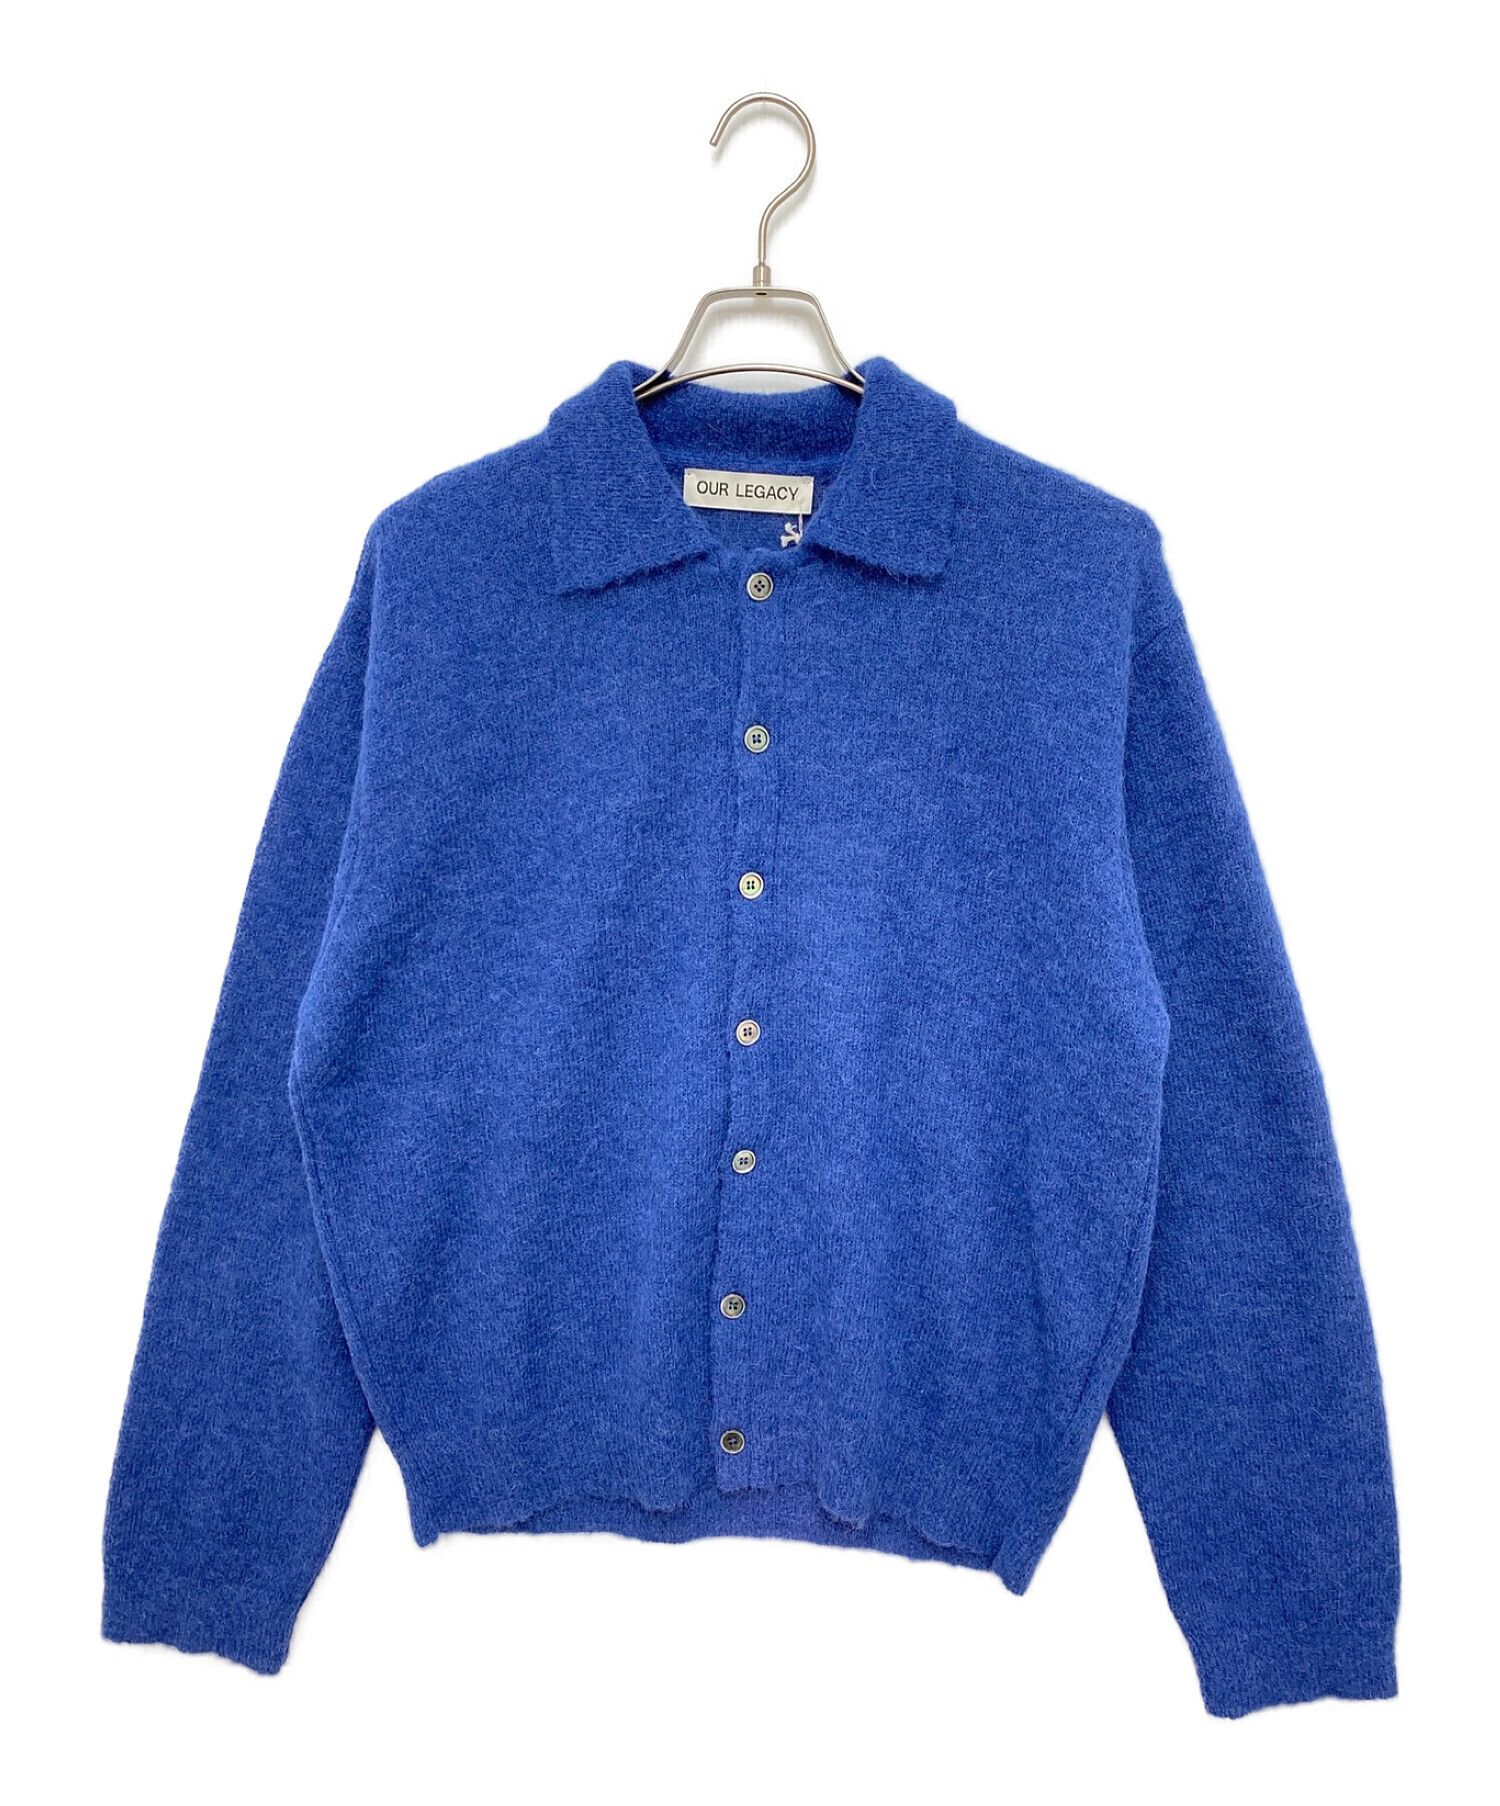 OUR LEGACY EVENING POLO ROYAL BLUEニットポロ - ニット/セーター